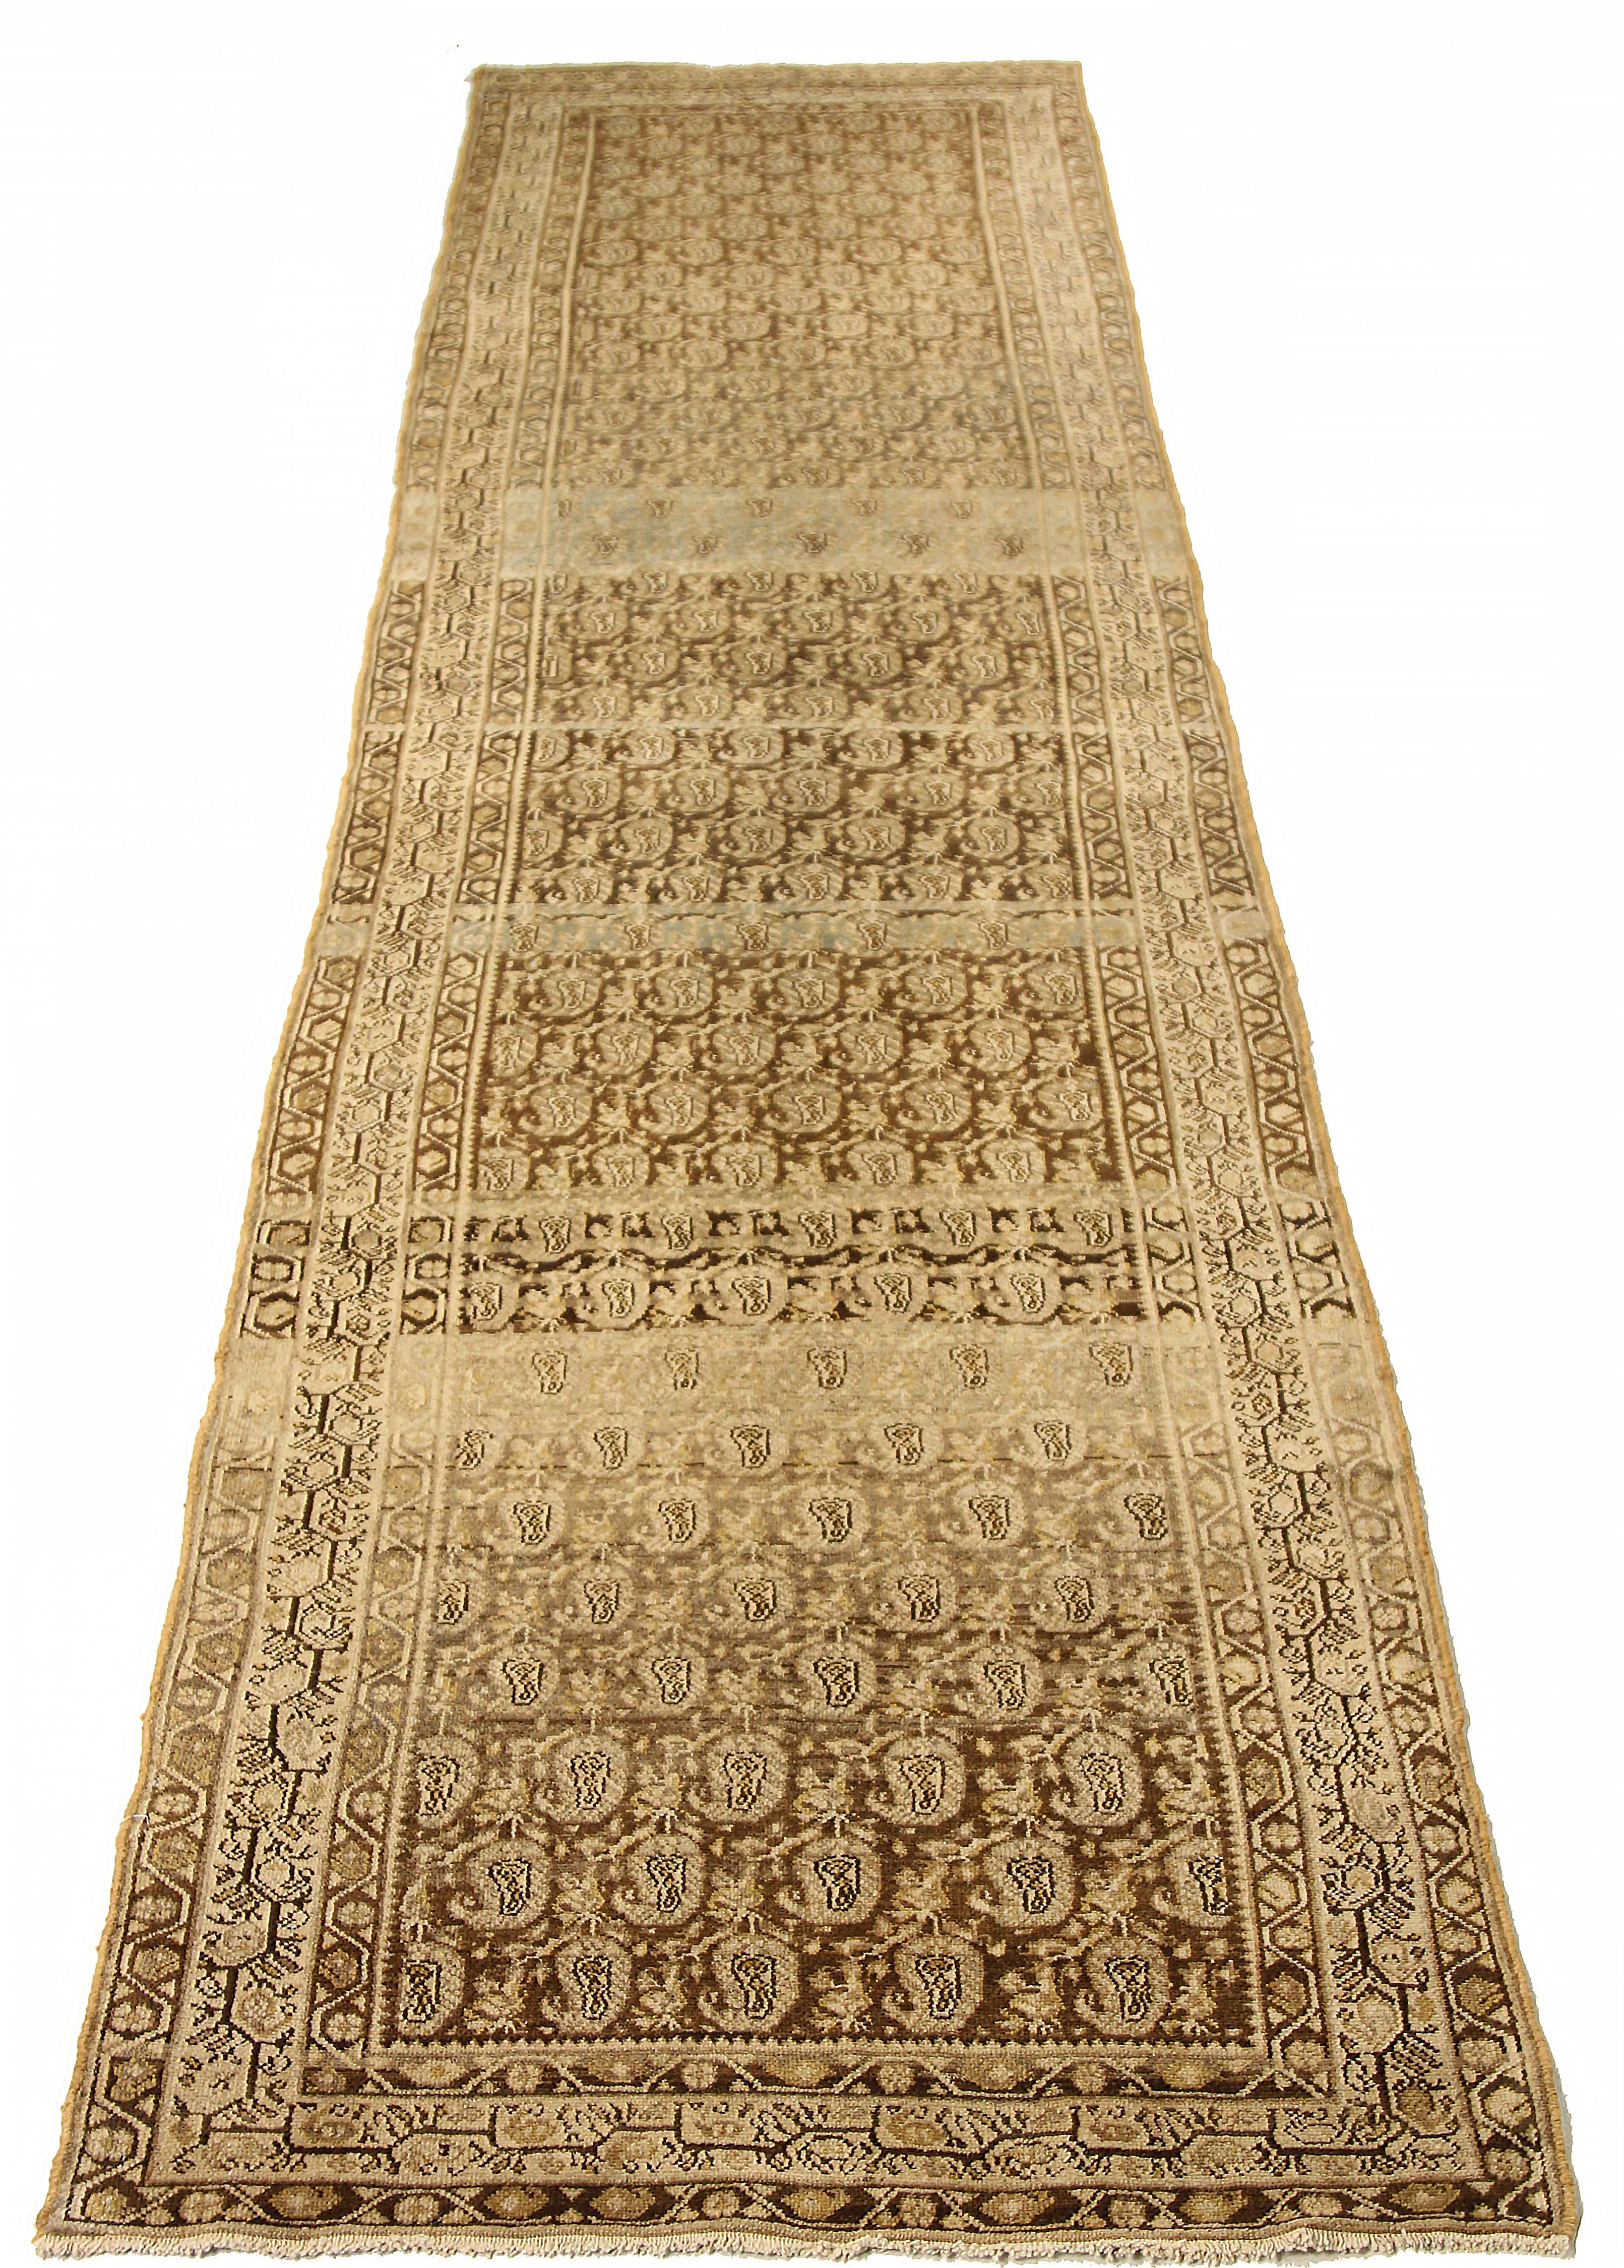 Antique Persian runner rug handwoven from the finest sheep’s wool and colored with all-natural vegetable dyes that are safe for humans and pets. It’s a traditional Koliai design featuring tribal and floral details on a beige field. It’s a beautiful